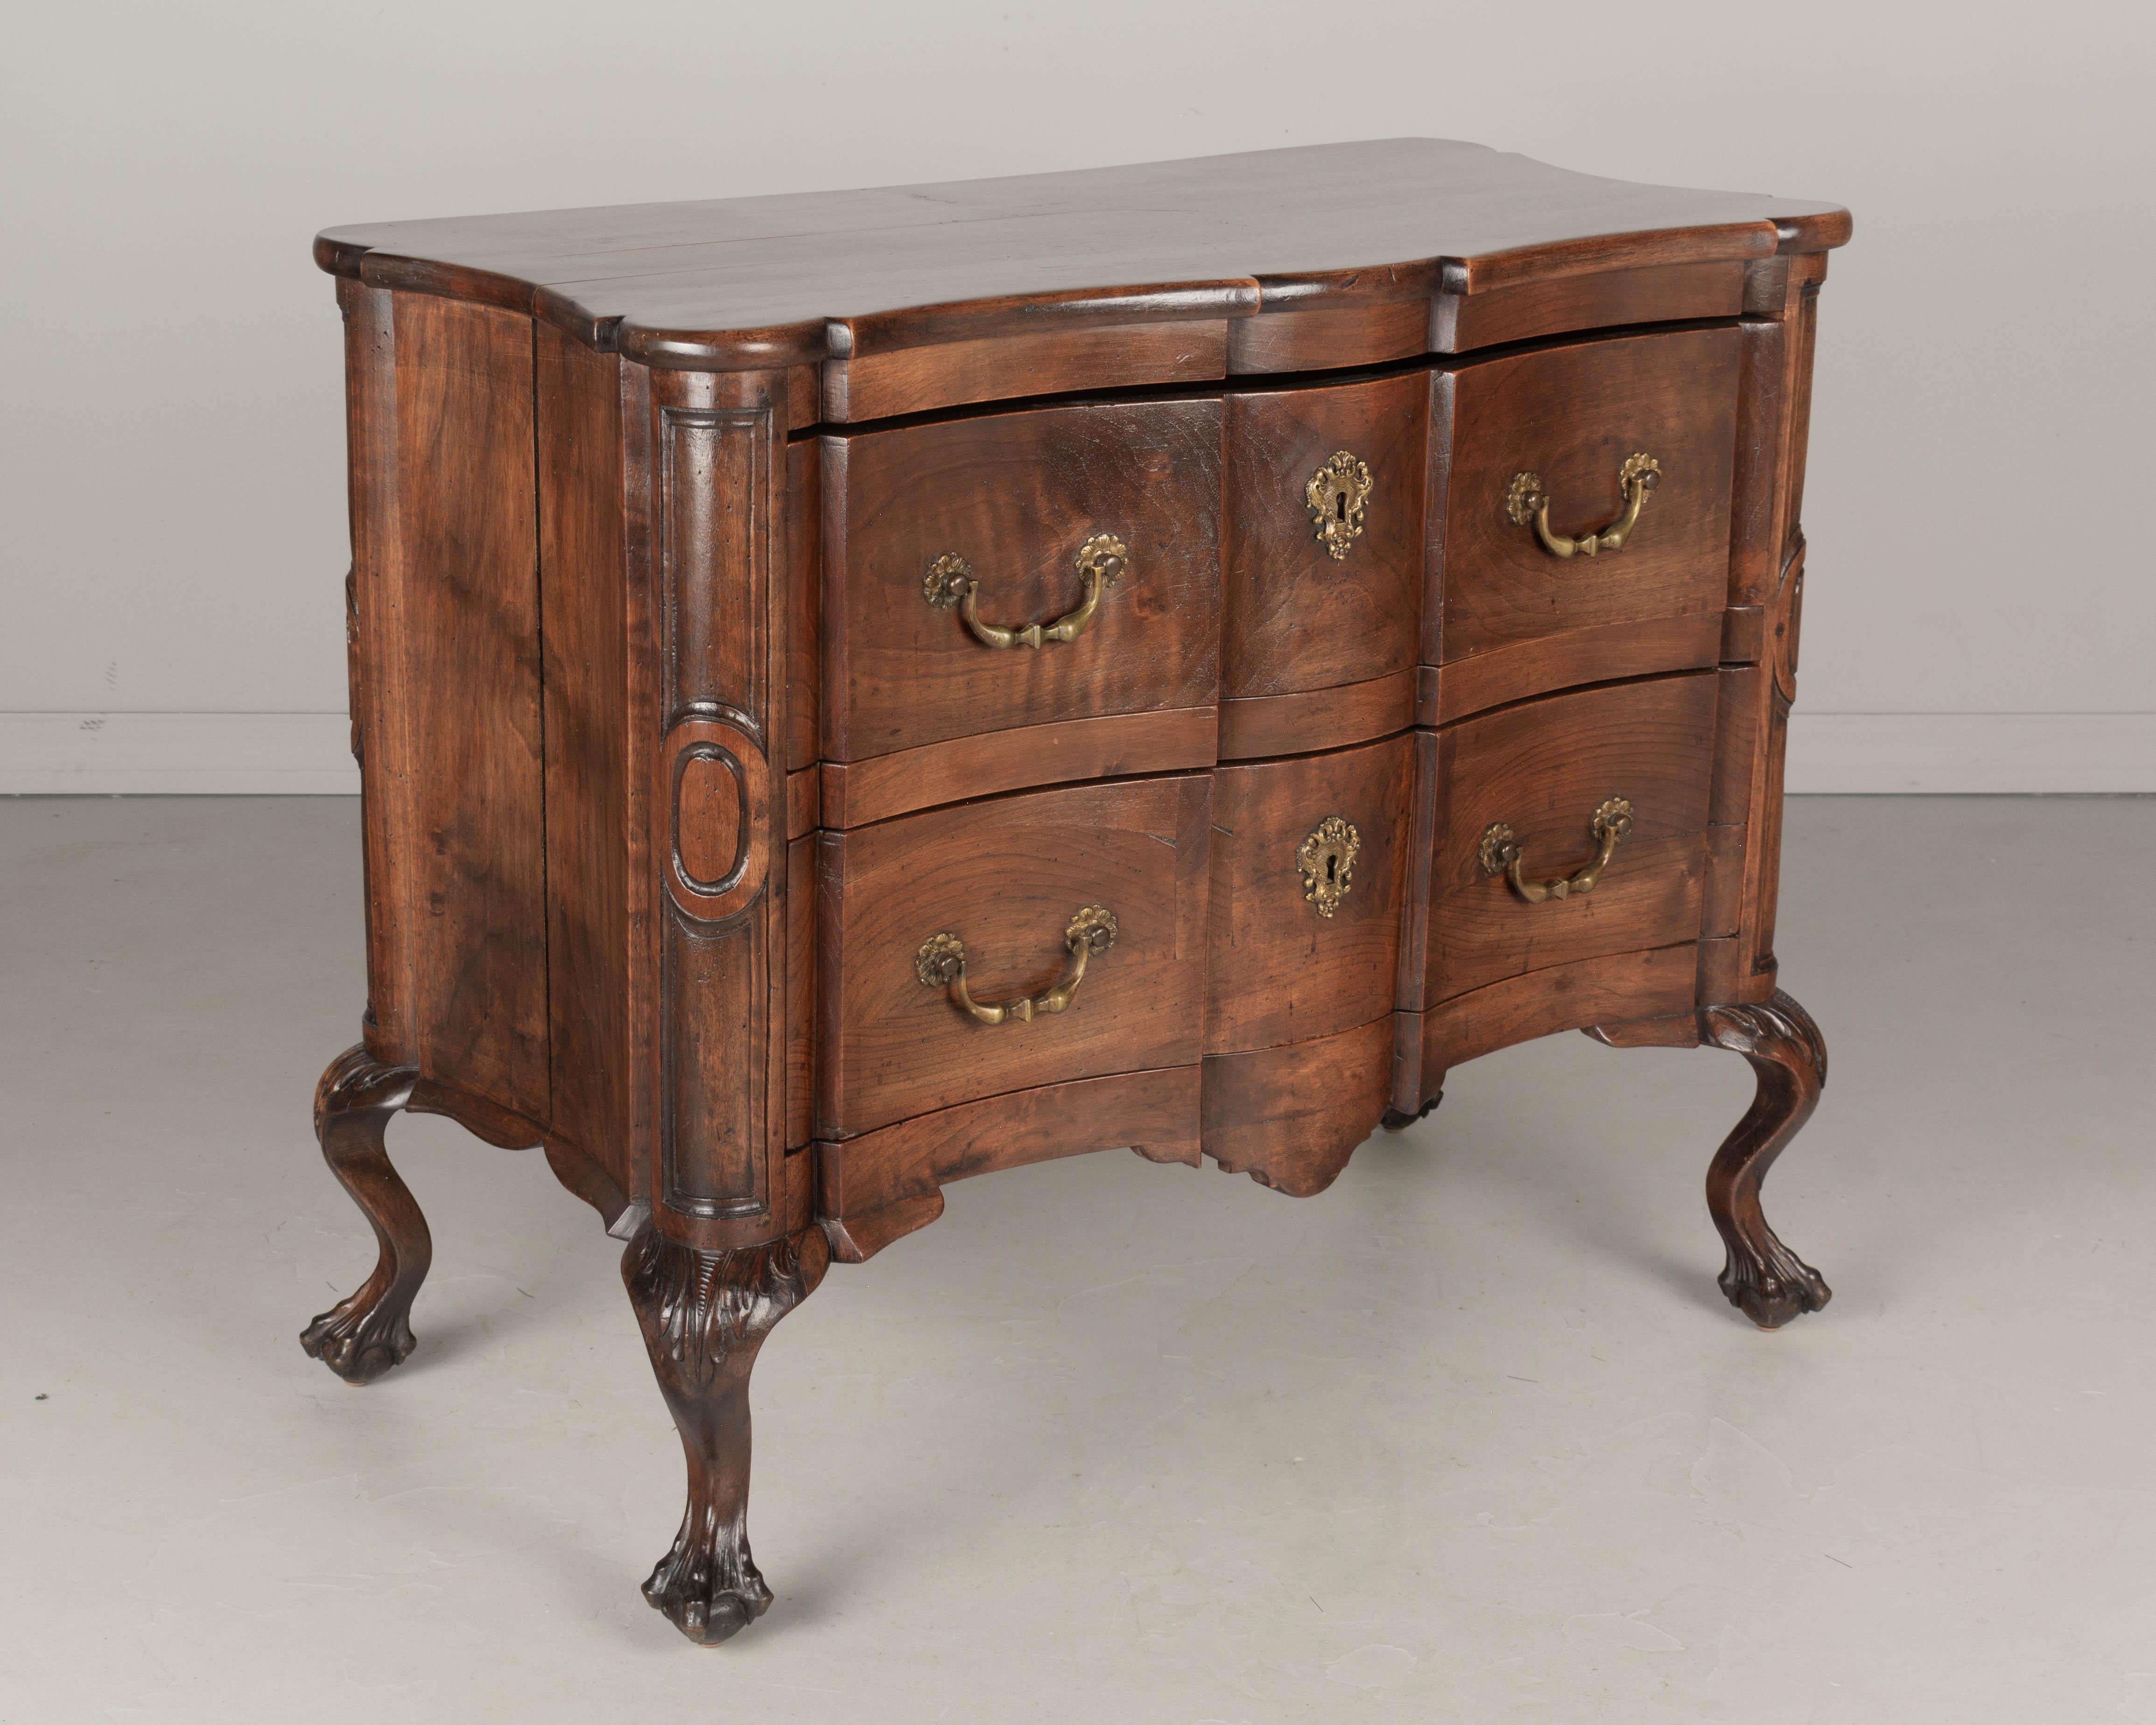 An early 19th century French commode made of solid walnut with an arbalète, or crossbow front and serpentine sides. Two deep dovetailed drawers with original bronze hardware. Locks are present, but no keys. Unusual short cabriole legs with carved